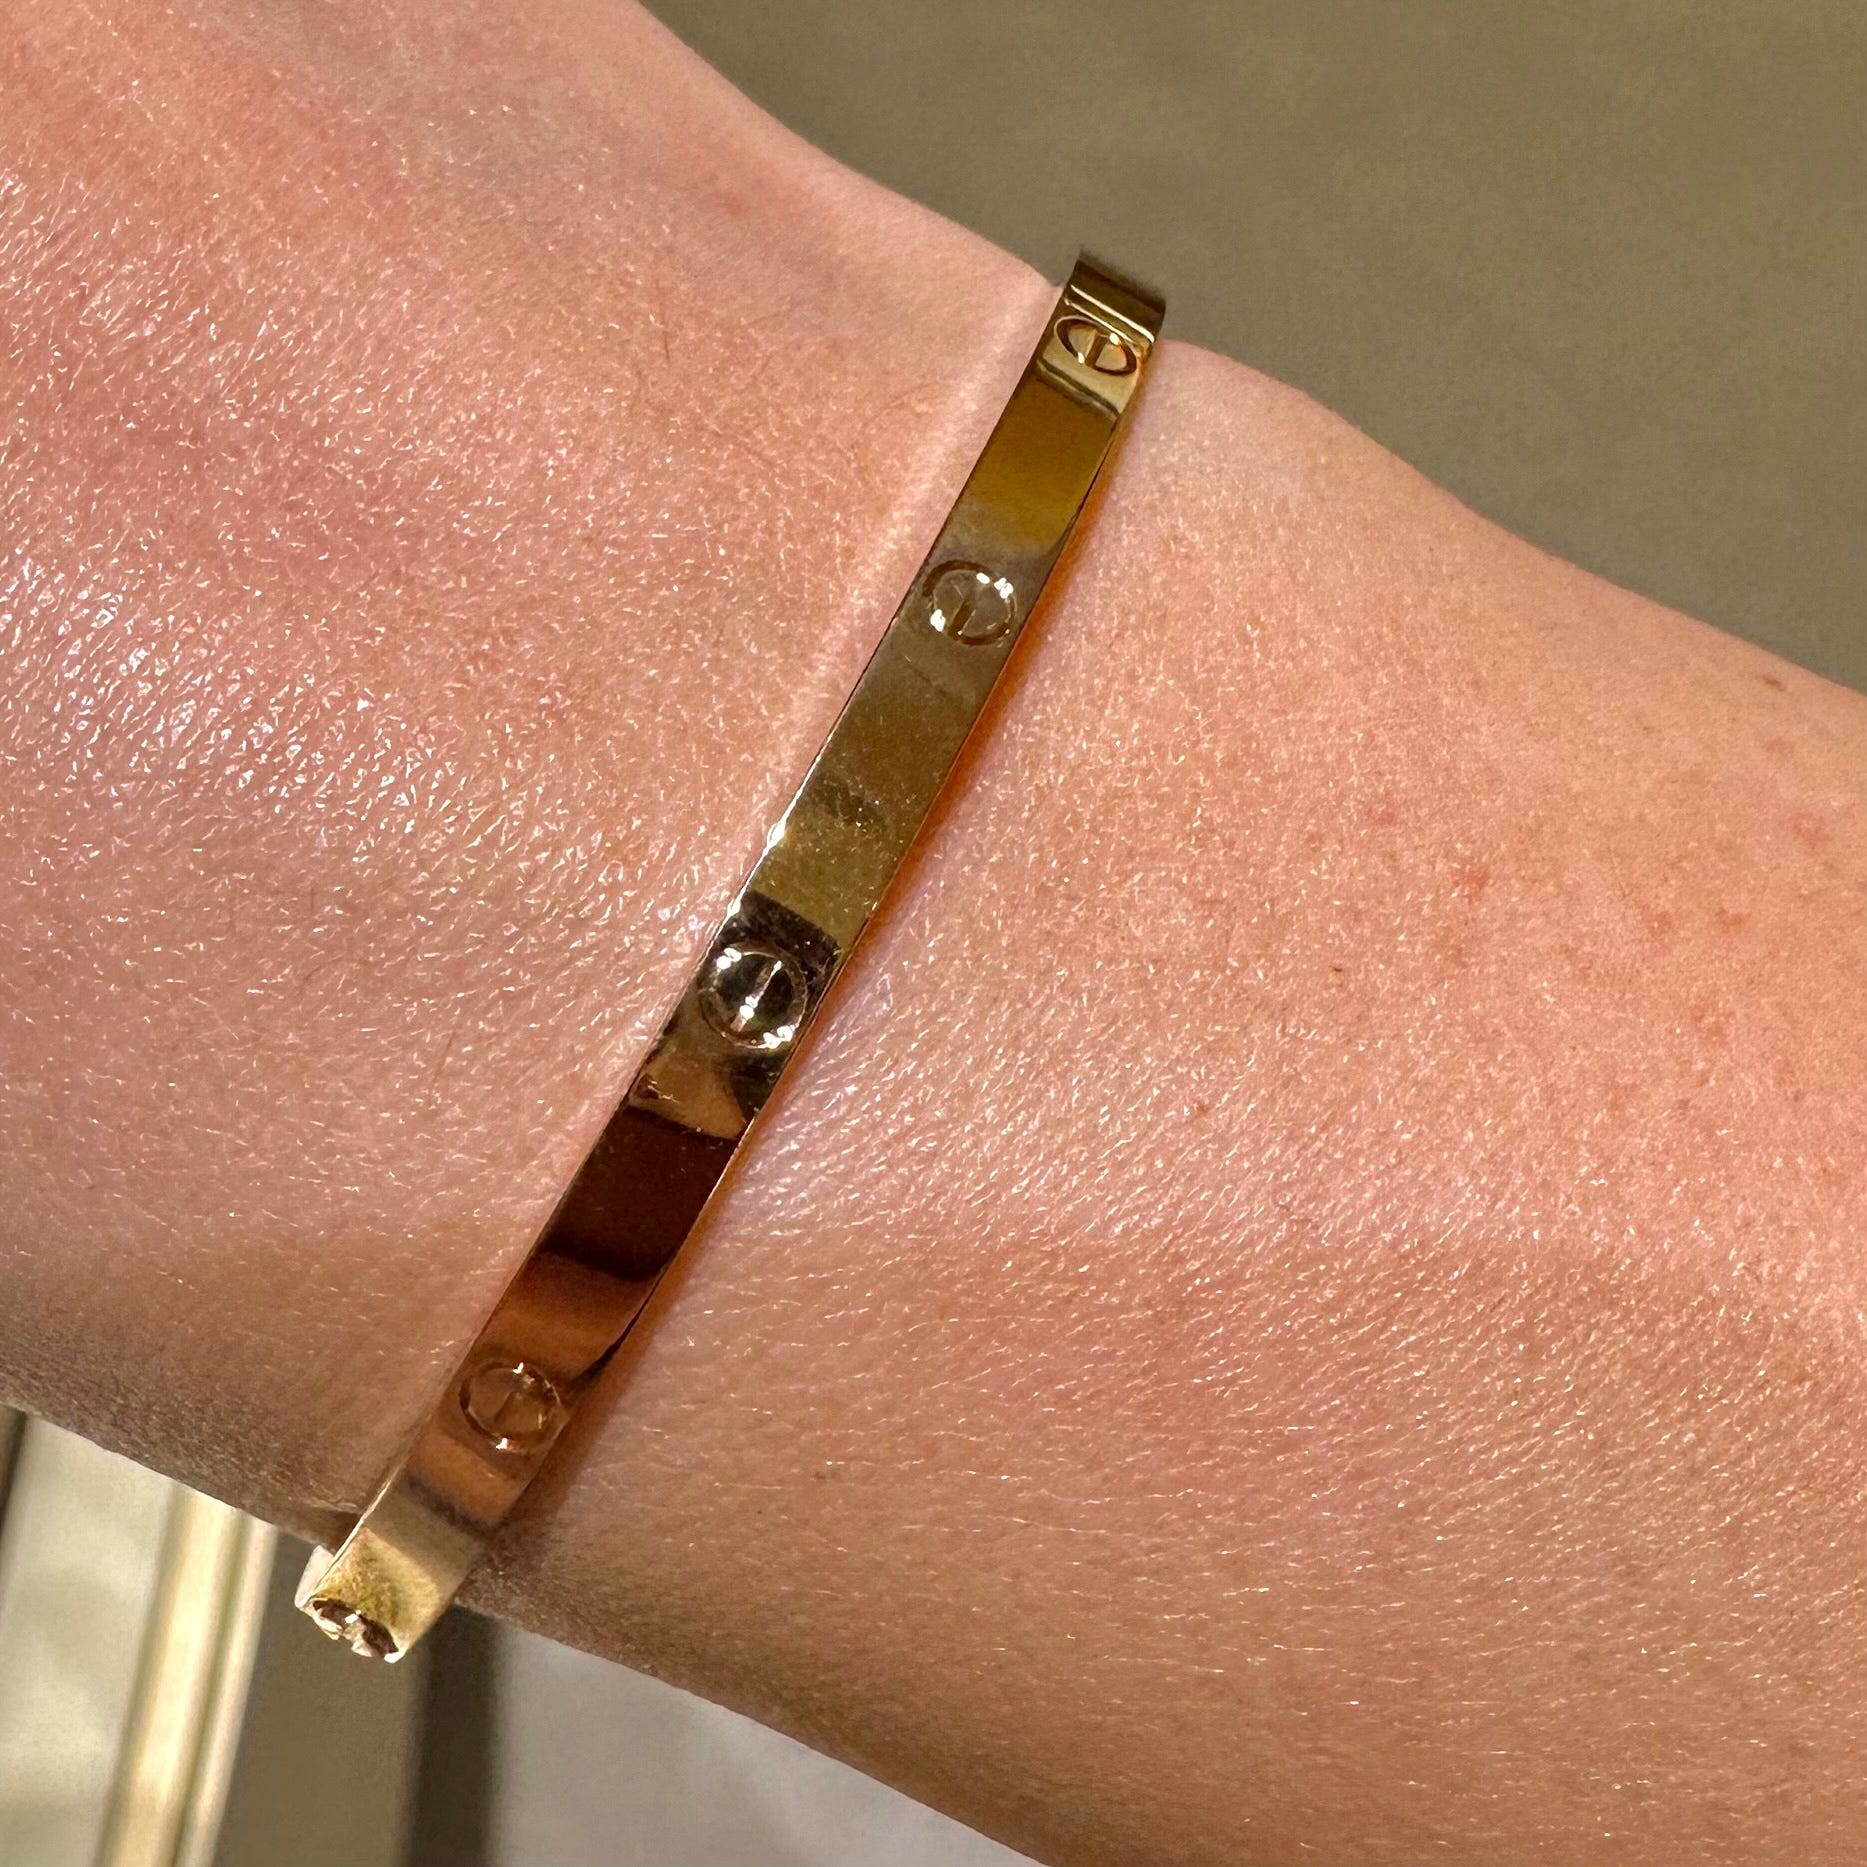 Why I Bought The Ridiculously Expensive Cartier Love Bracelet